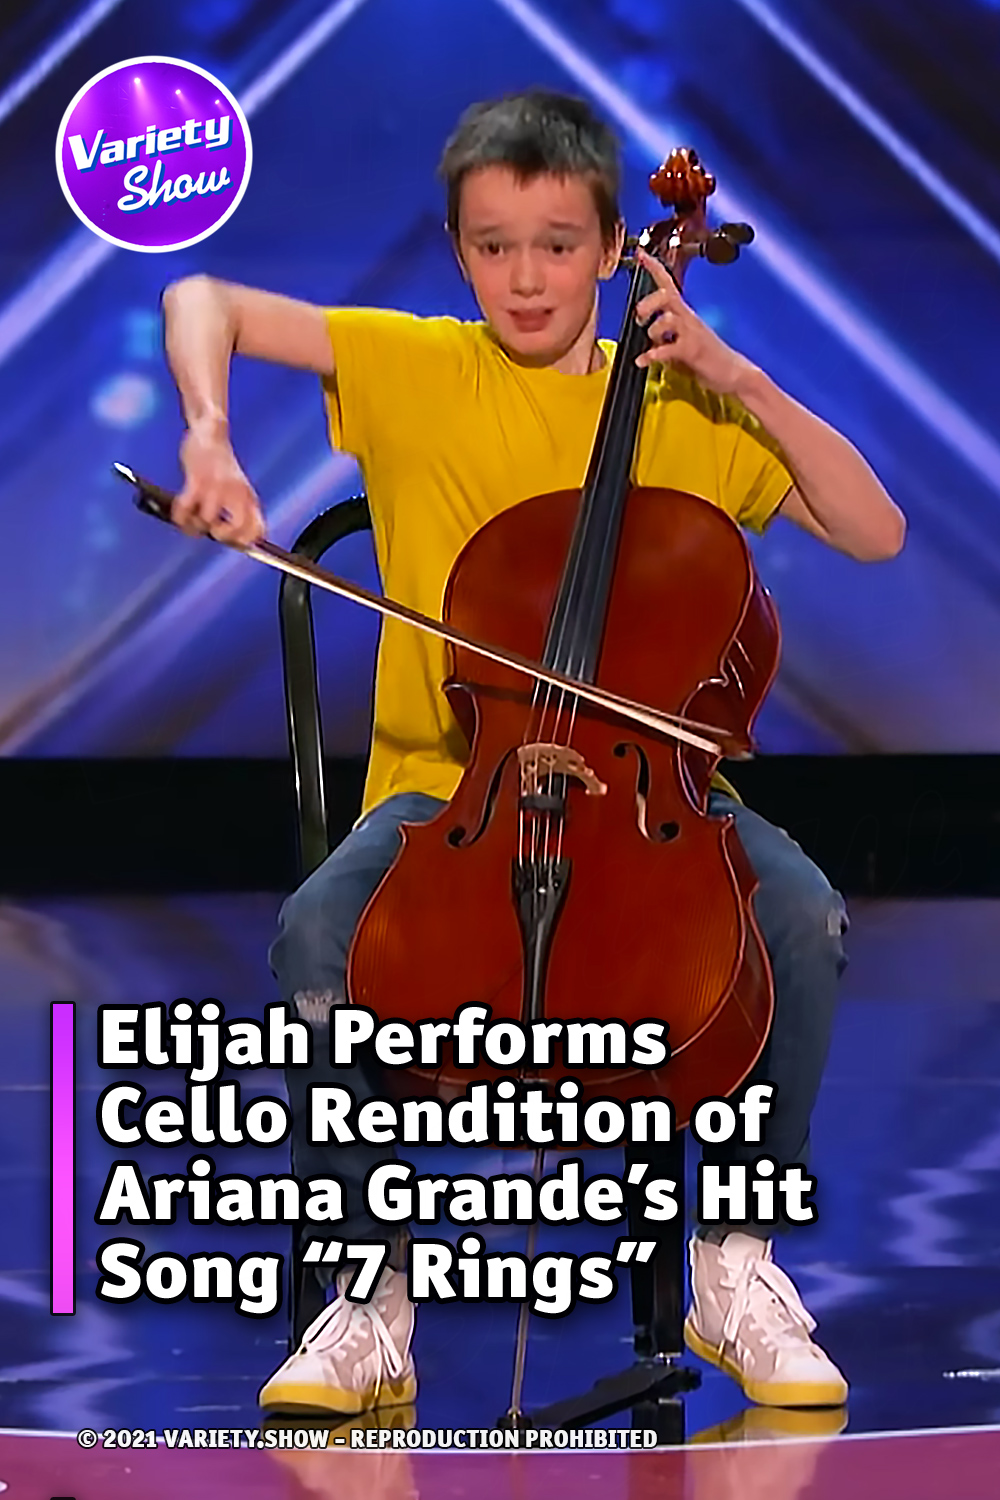 Elijah Performs Cello Rendition of Ariana Grande’s Hit Song “7 Rings”